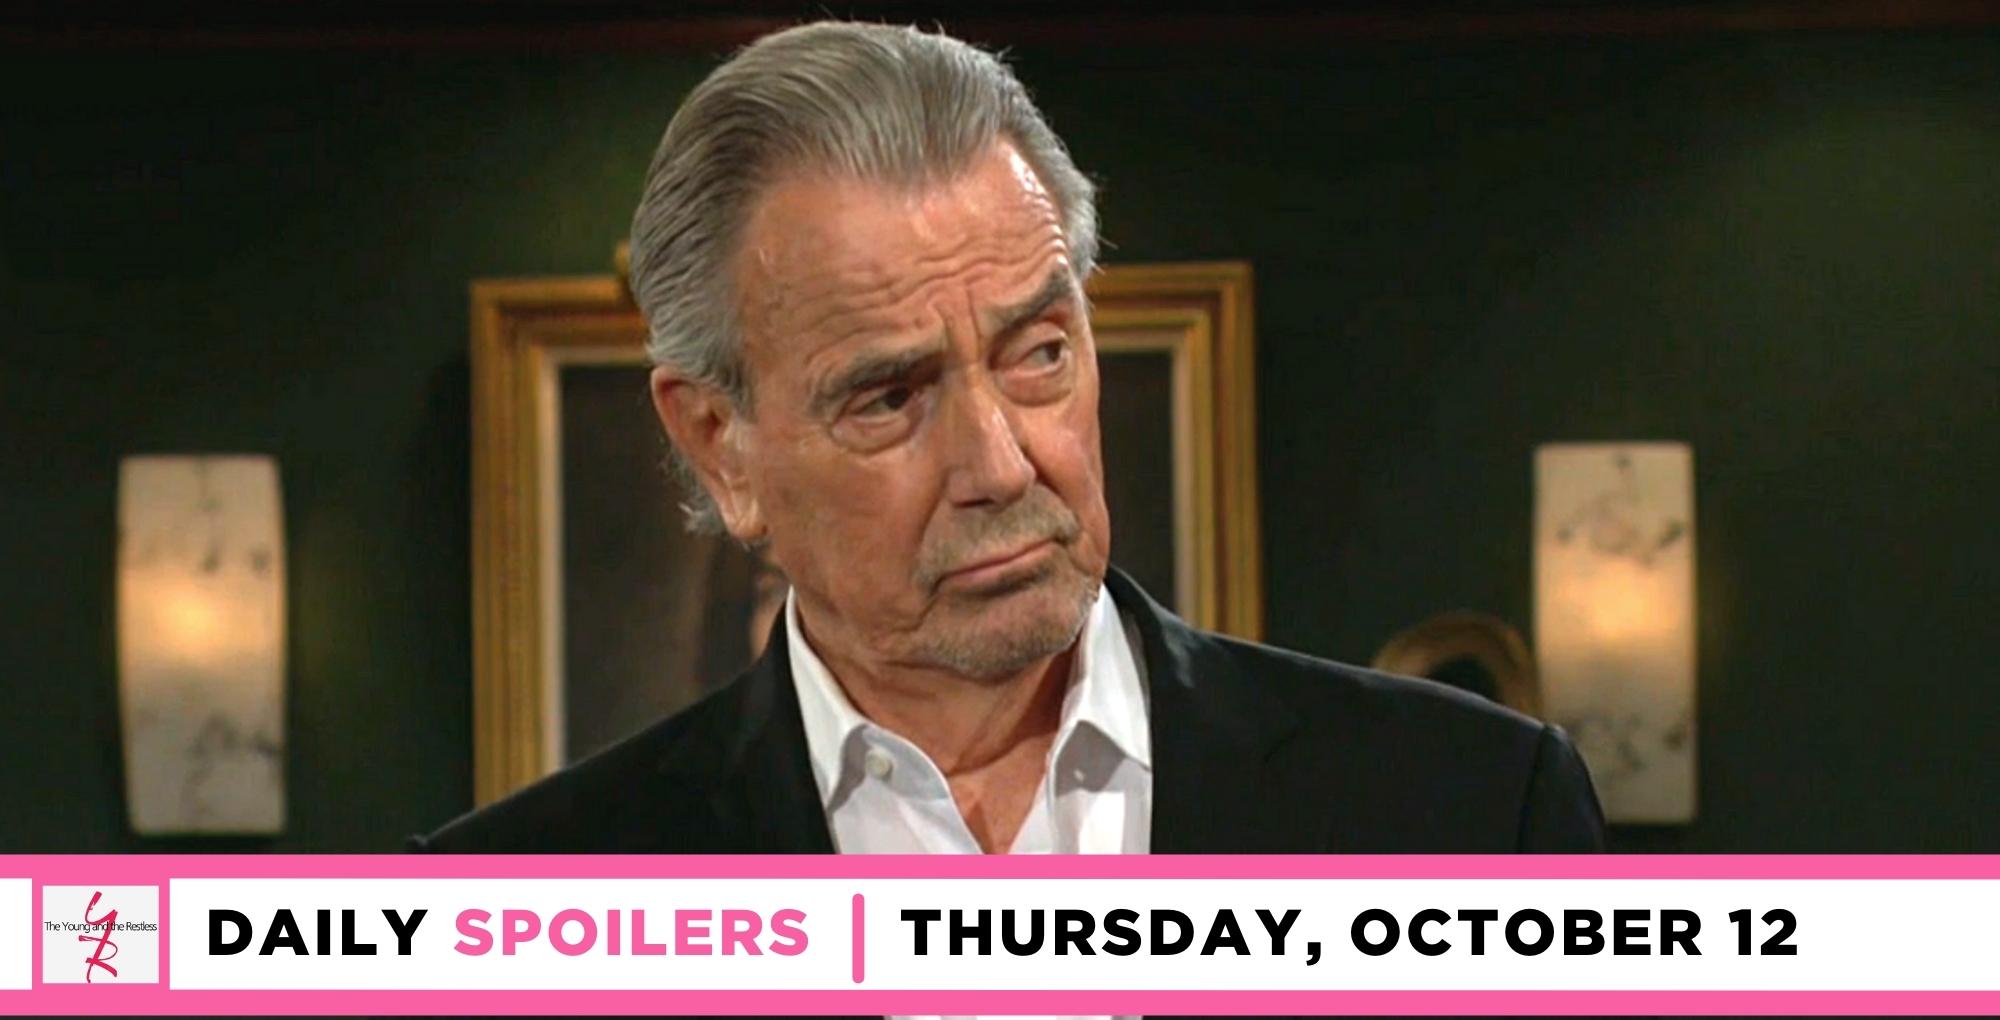 the young and the restless spoilers for october 12, 2023, has victor newman worrying his family.